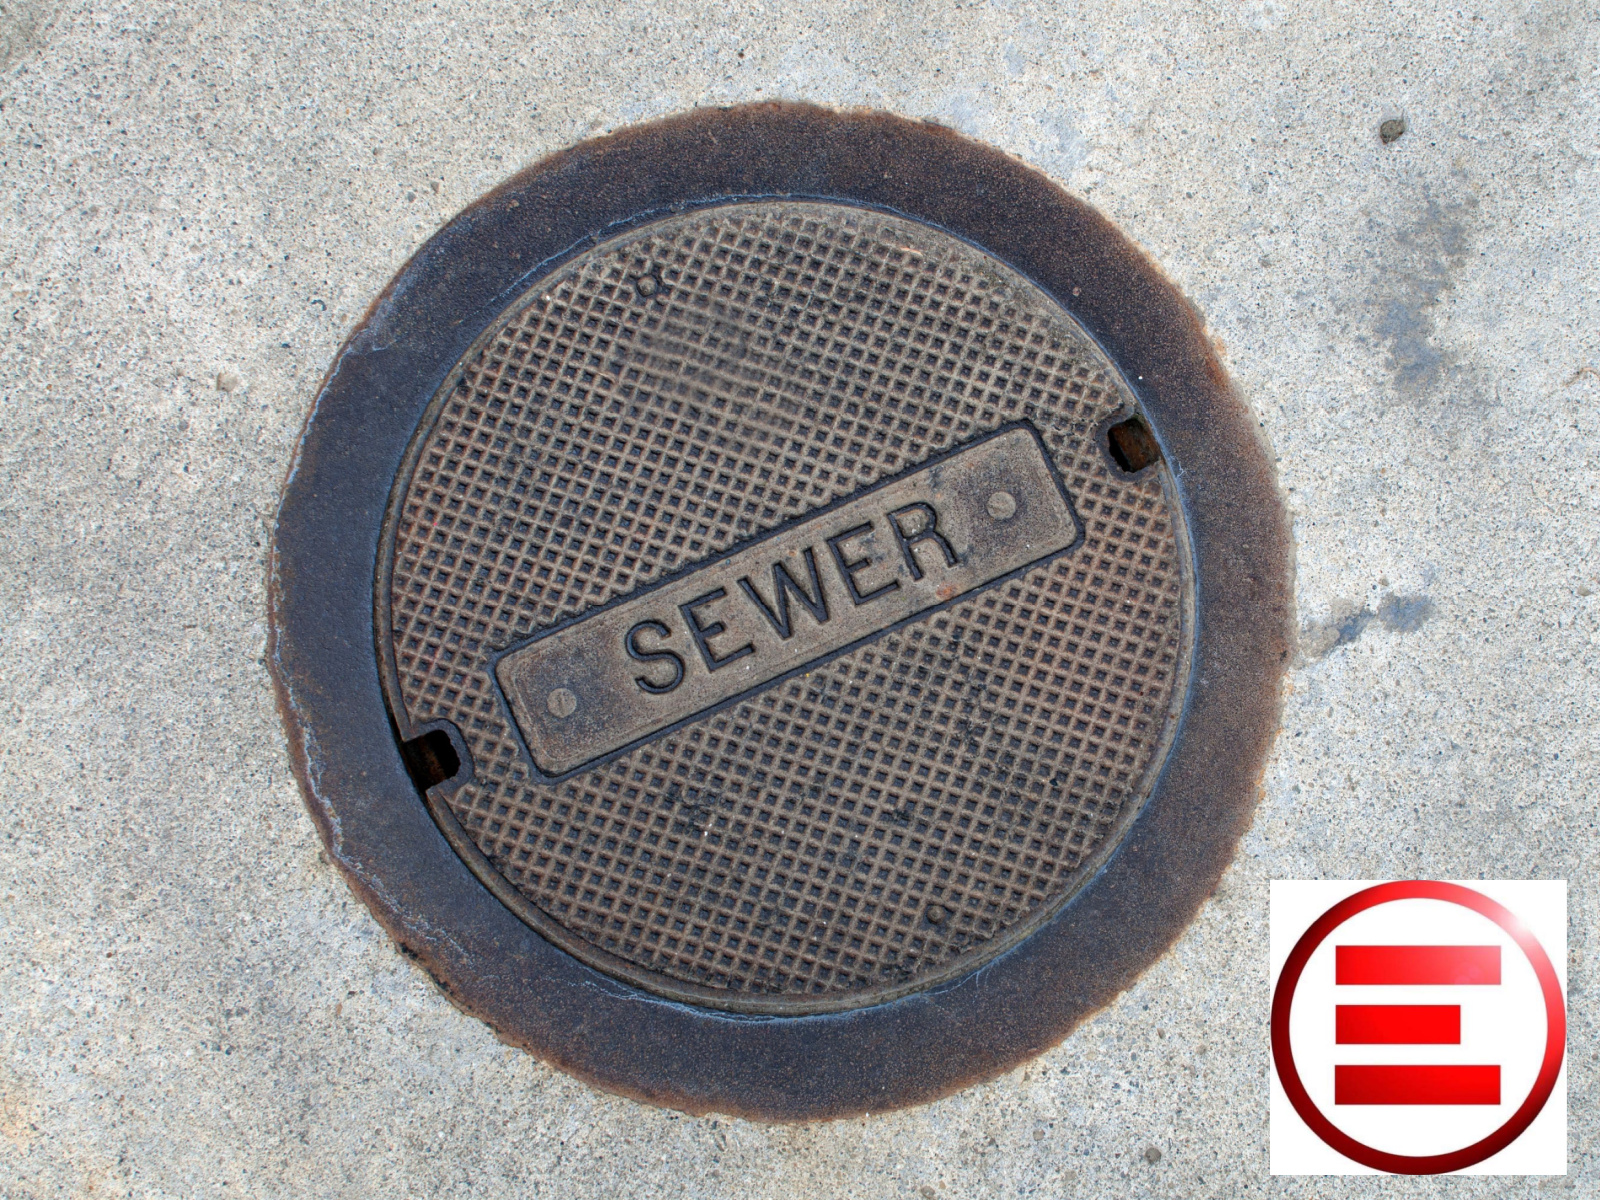 The Best Unclog Sewer Line & Sewer Repair Service in South Fulton